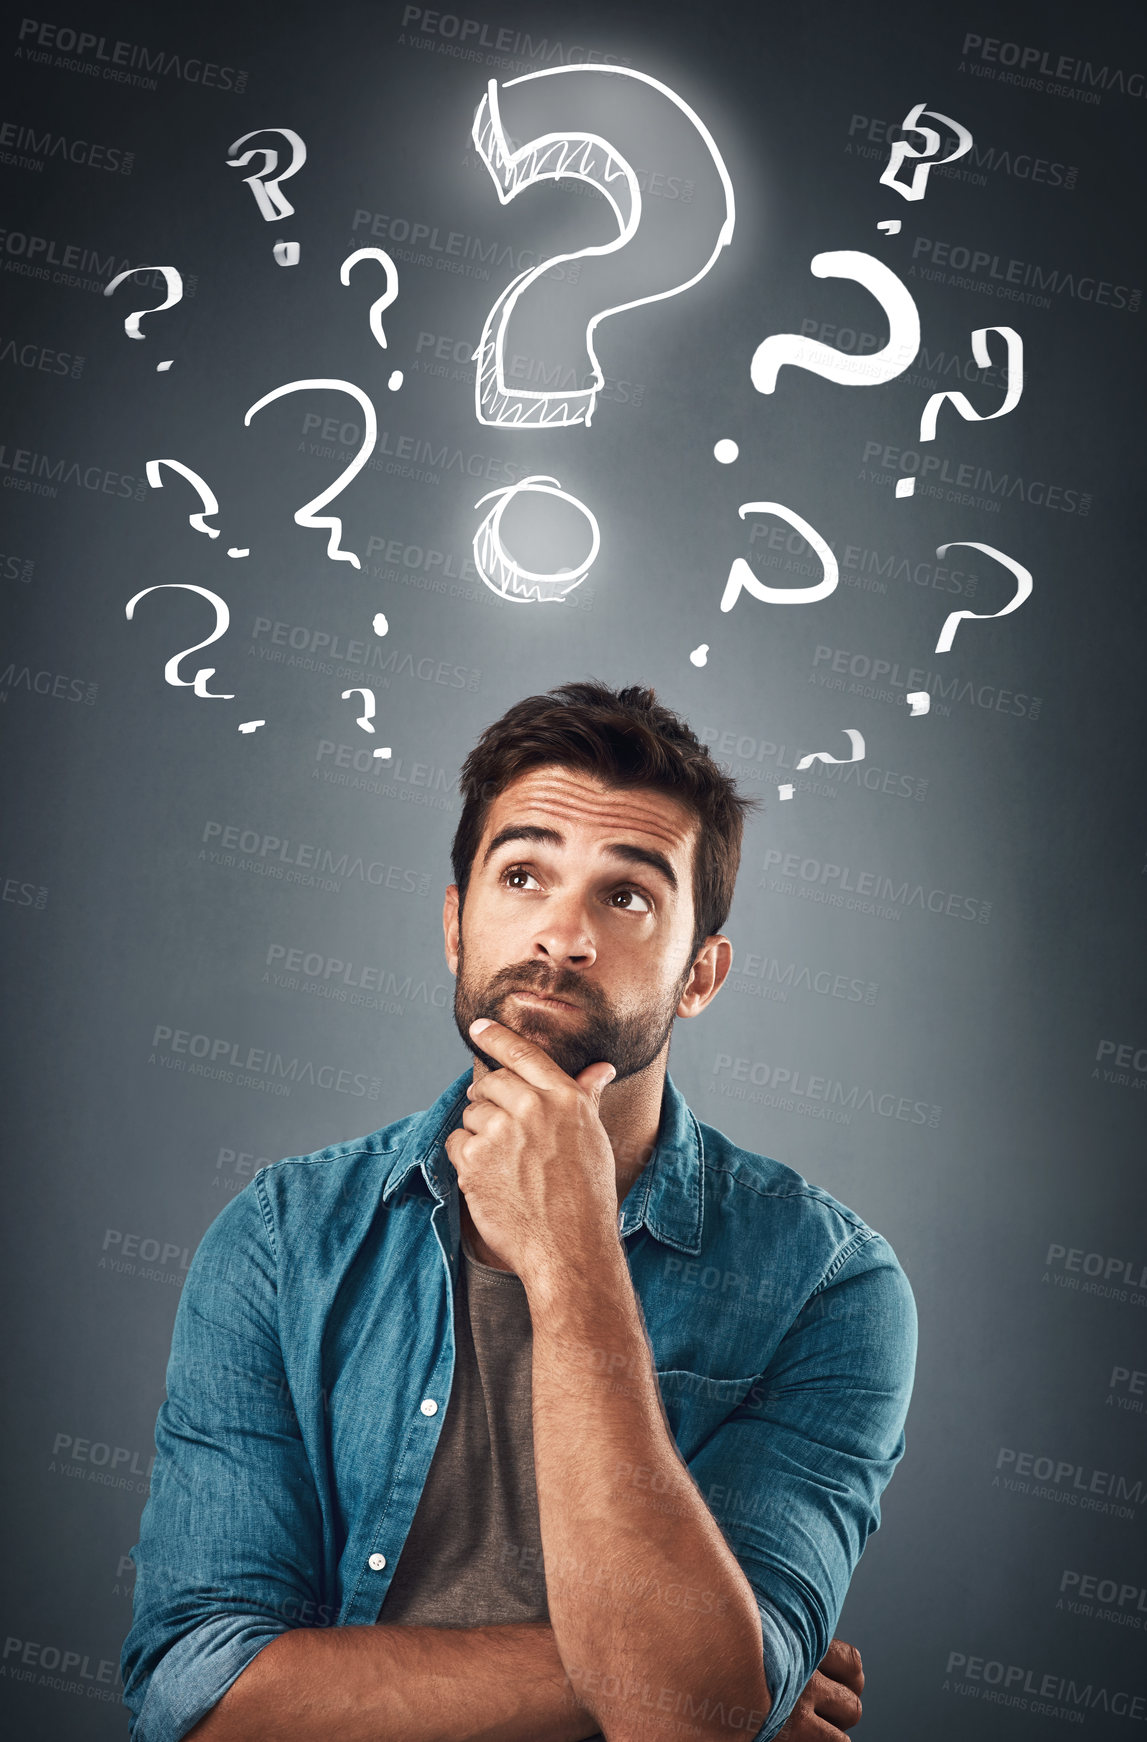 Buy stock photo Studio shot of a handsome young man looking thoughtful while standing underneath an illustration of question marks against a grey background